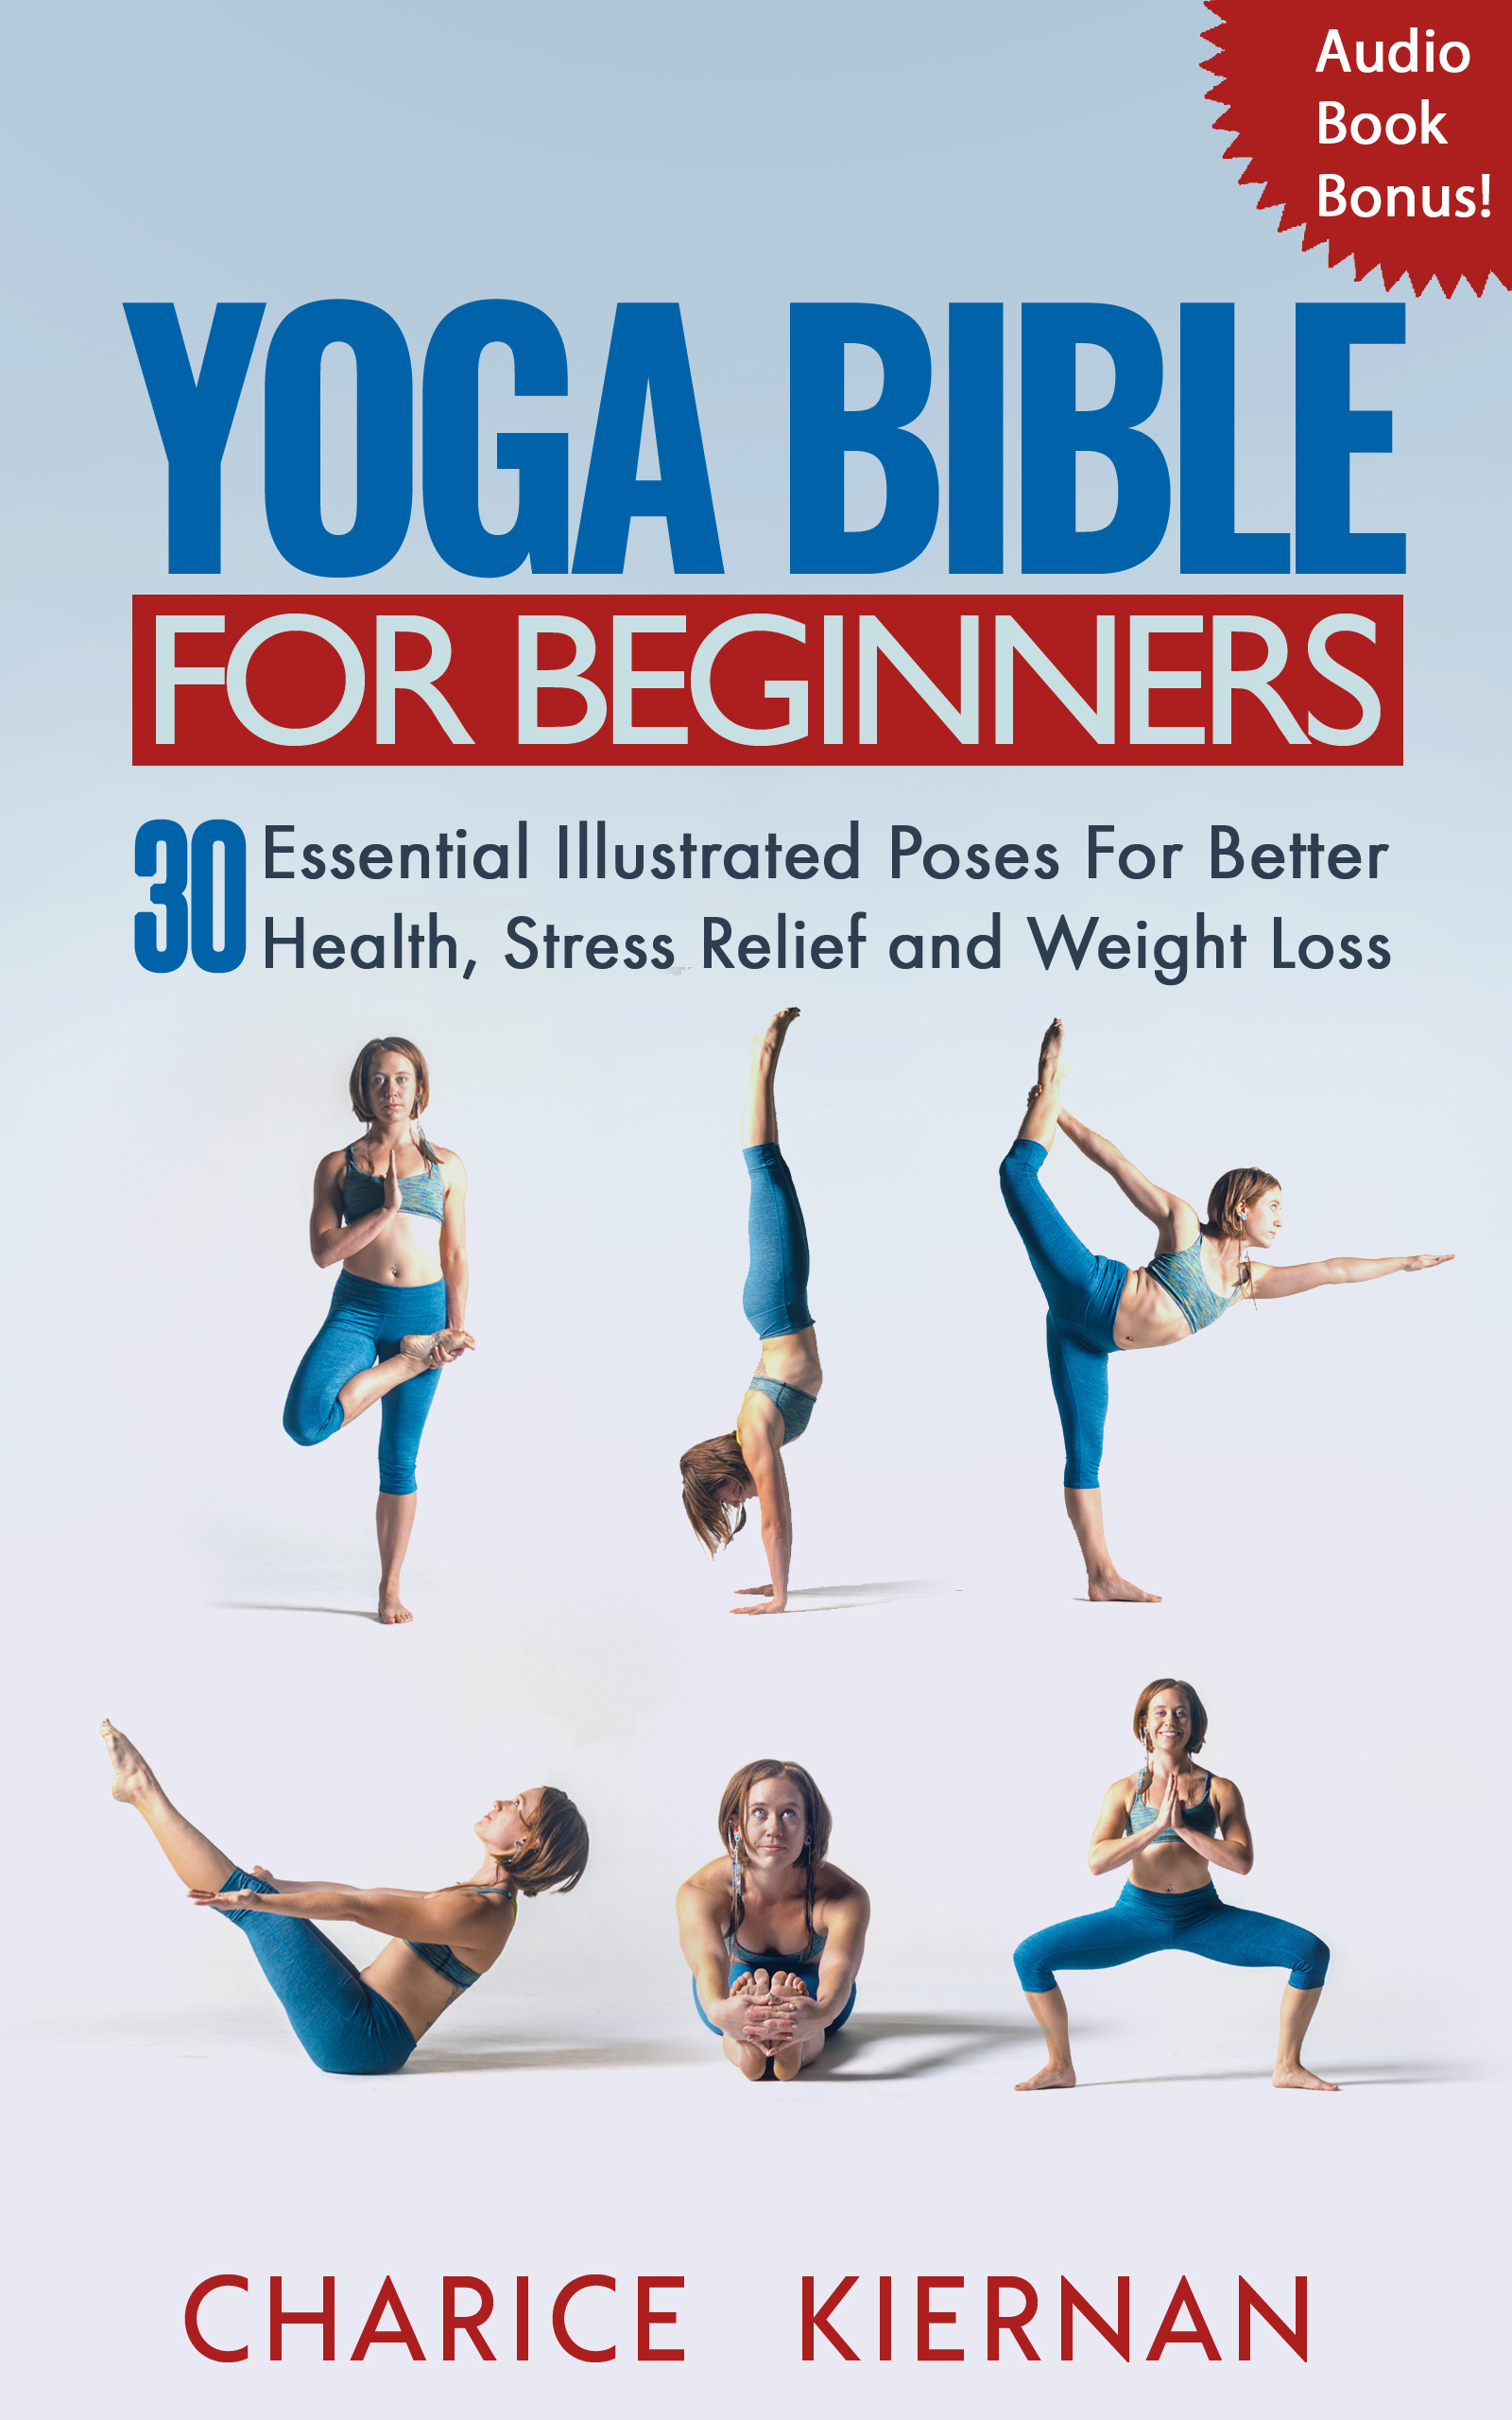 FREE: The Yoga Bible For Beginners: 30 Essential Illustrated Poses For Better Health, Stress Relief and Weight Loss by Charice Kiernan